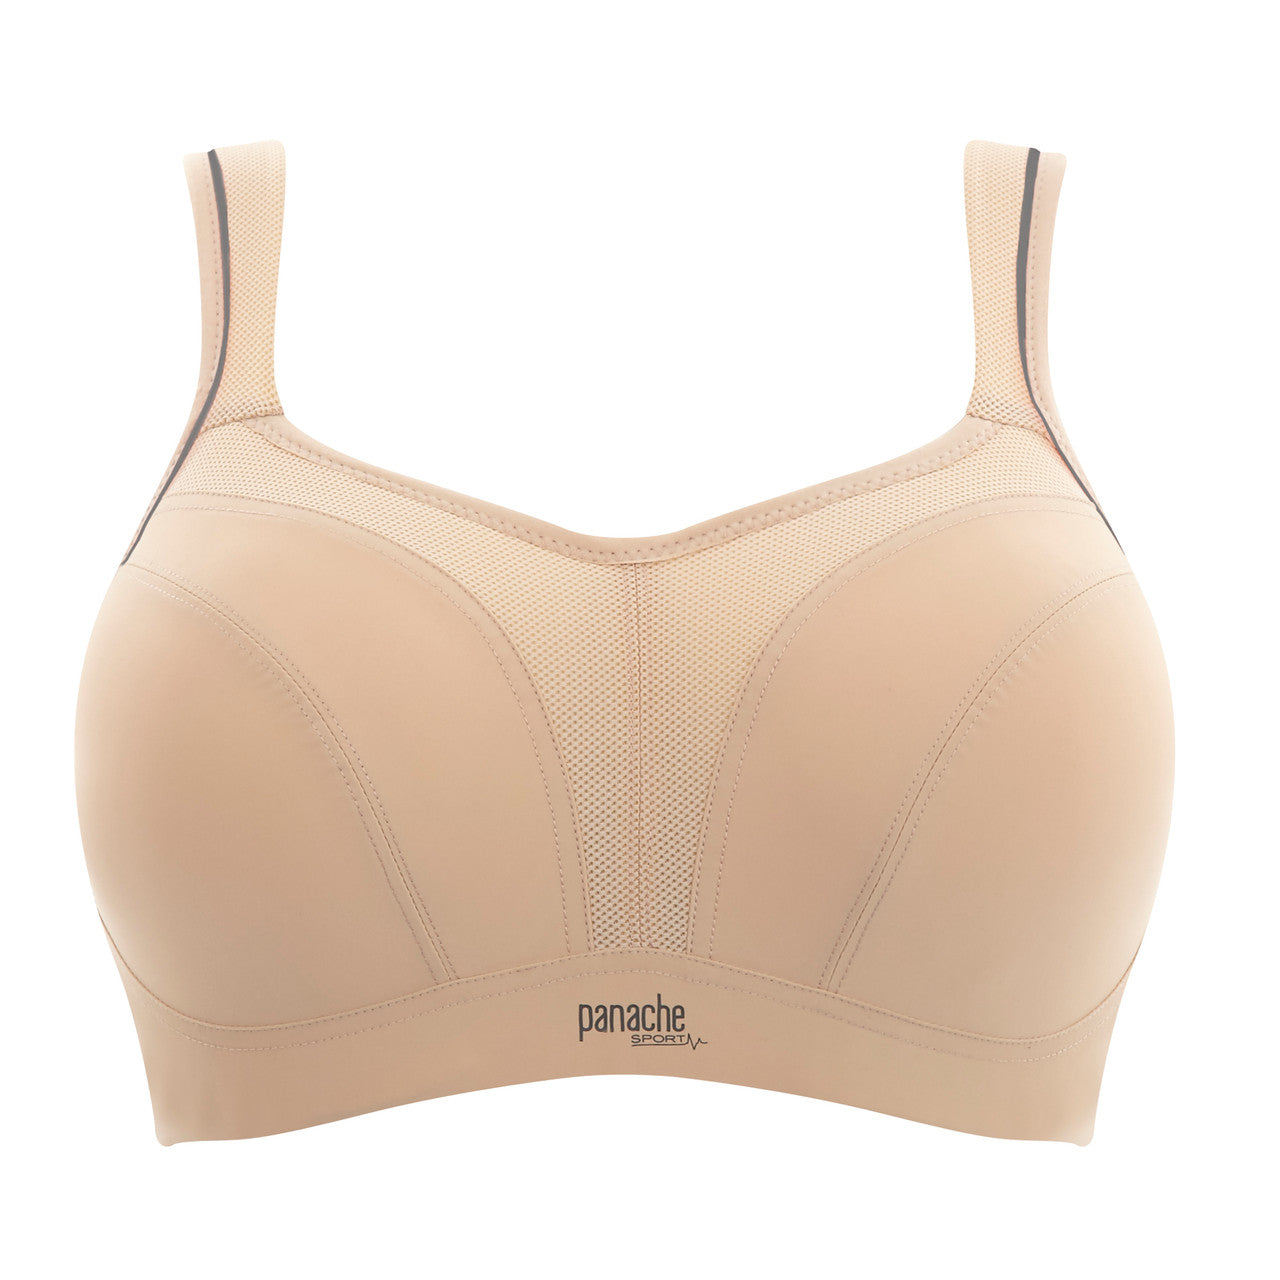 Panache Wired Sports Bra front view product photo.